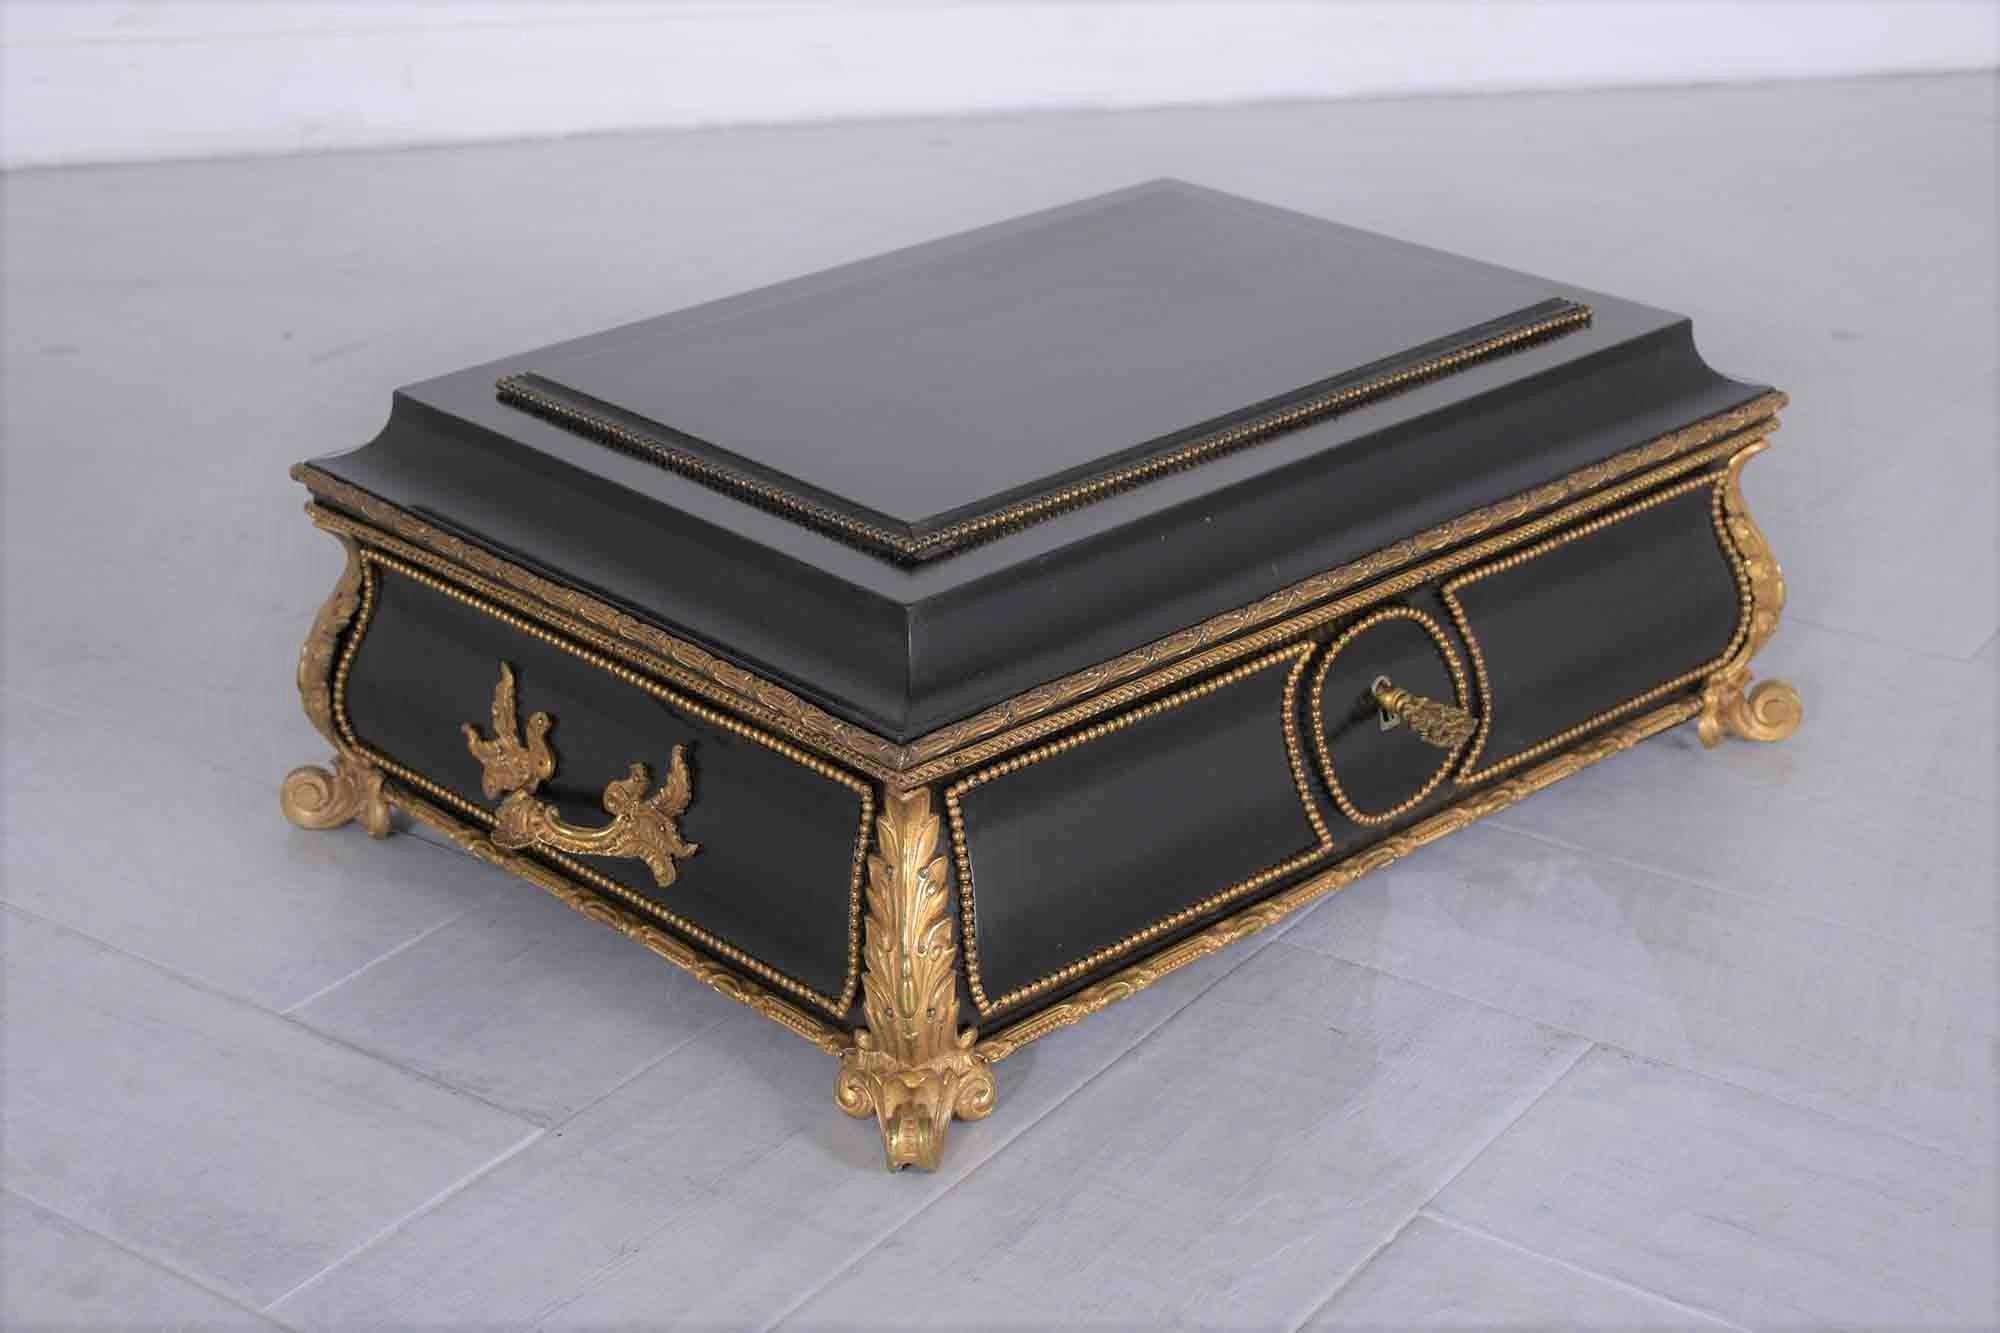 This antique french Louis XVI-style jewelry box is handcrafted out of wood and has been restored by our team of expert craftsmen. The box has a hand-carved top and is finished in its original black ebonized finish with bronze molded accents